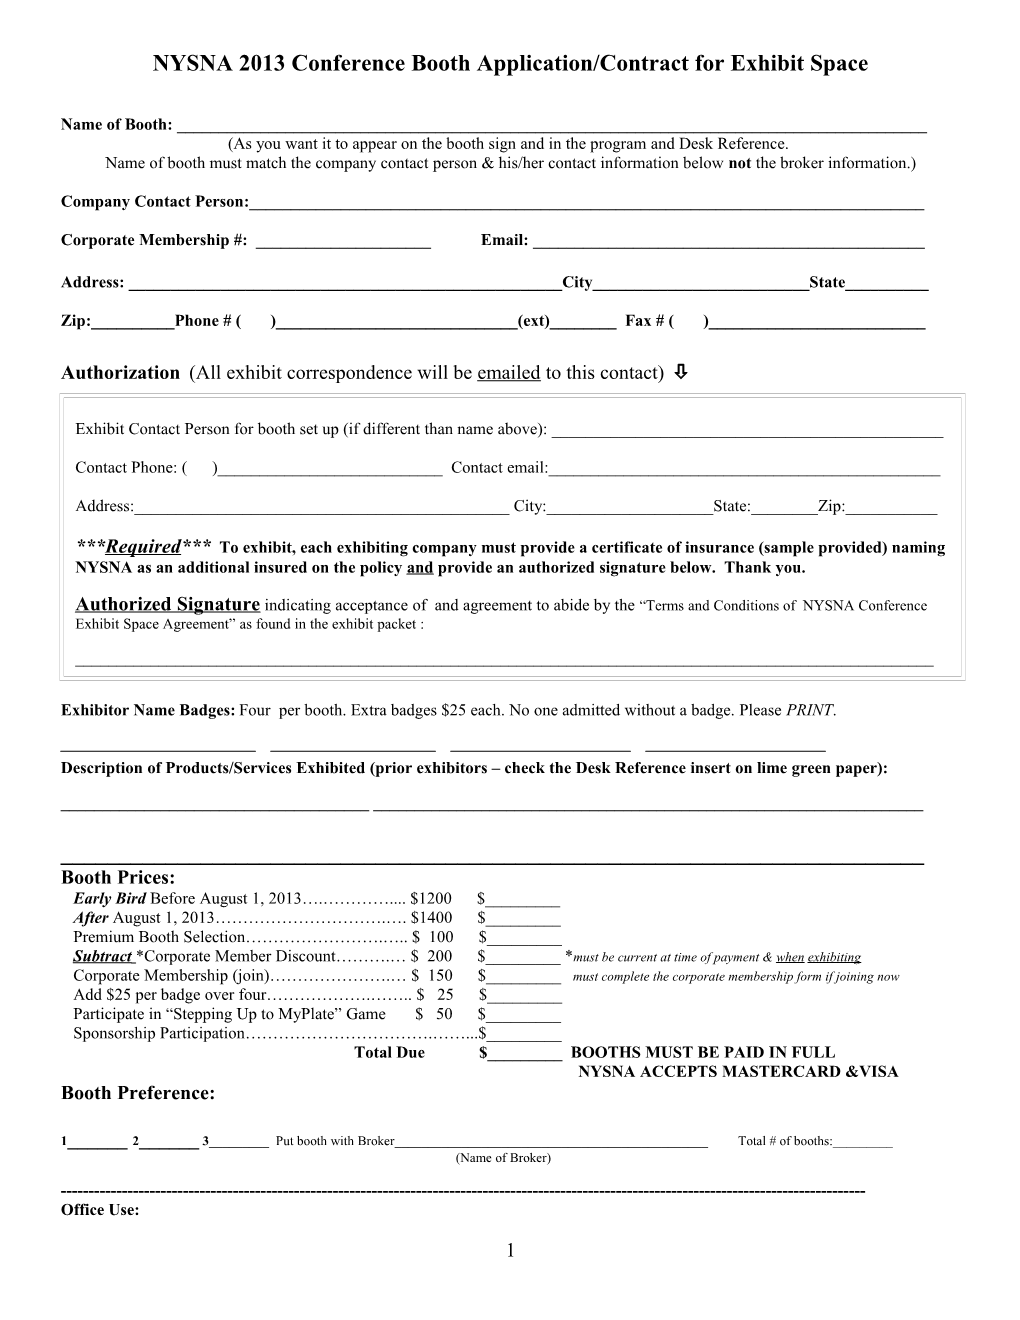 NYSNA2013 Conferencebooth Application/Contract for Exhibit Space